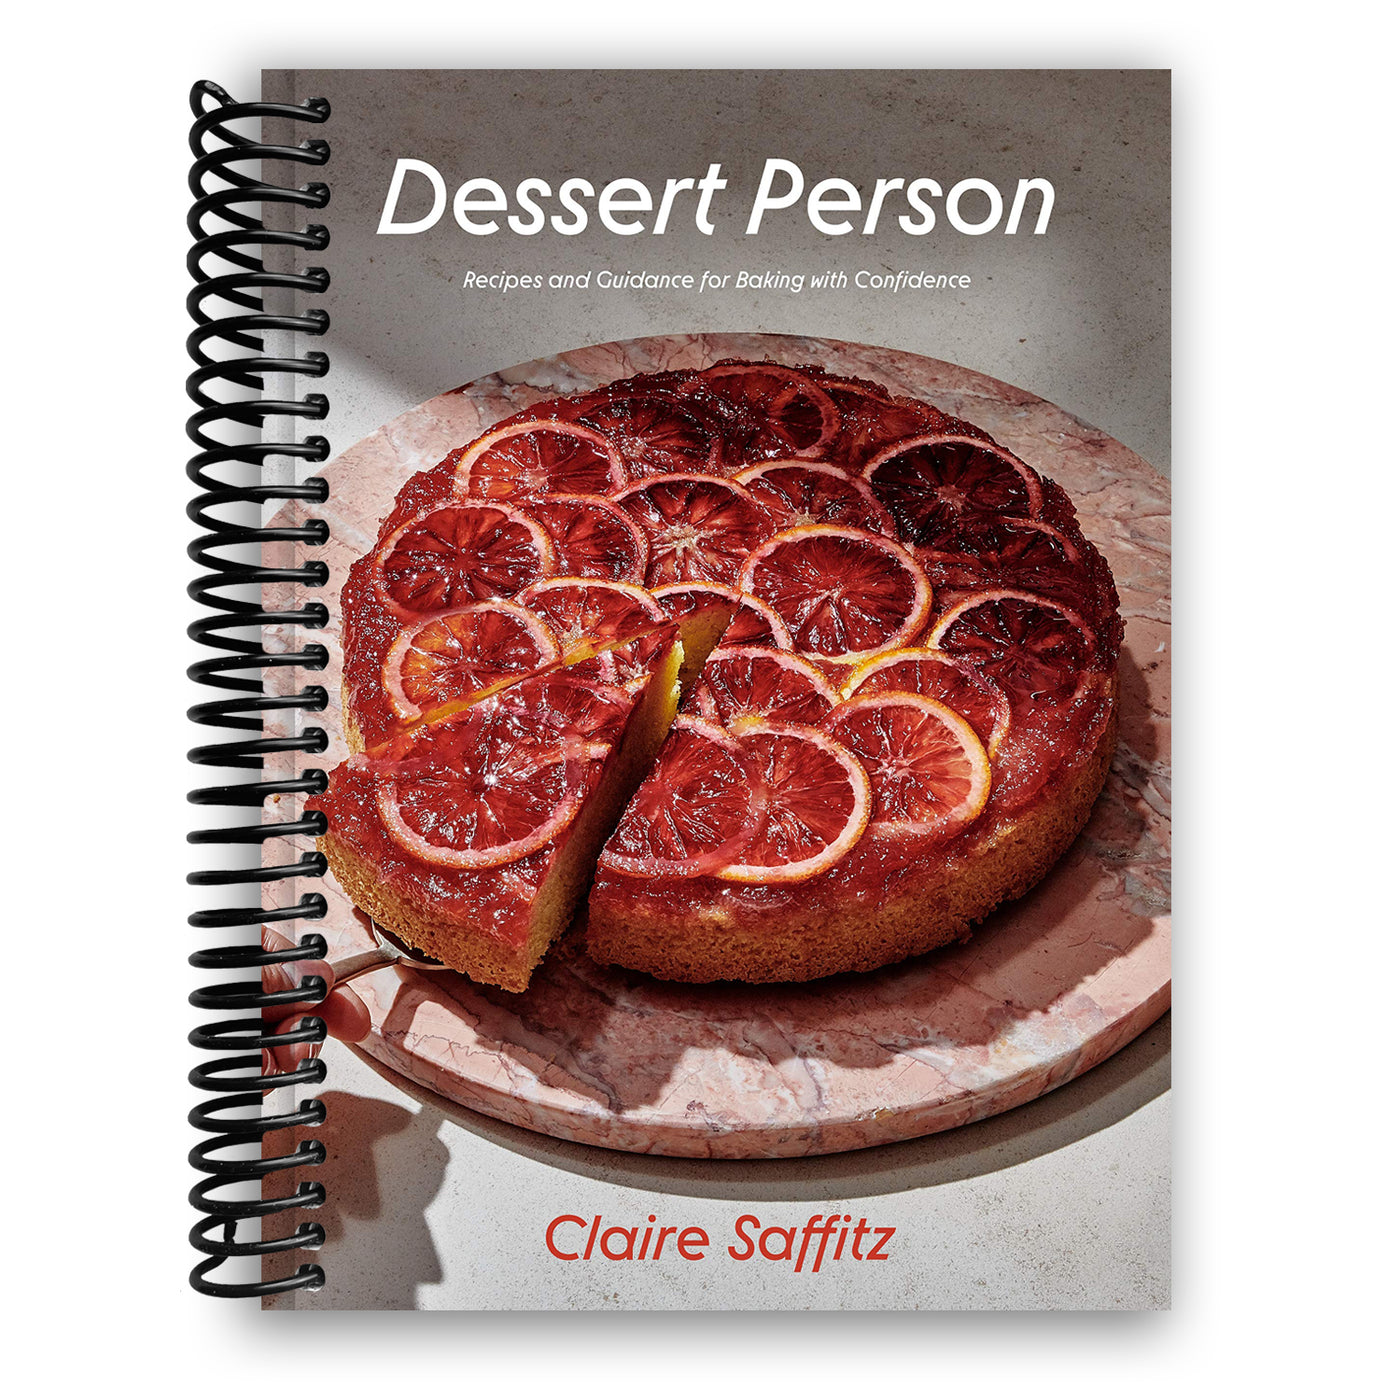 Dessert Person: Recipes and Guidance for Baking with Confidence (Spiral Bound)